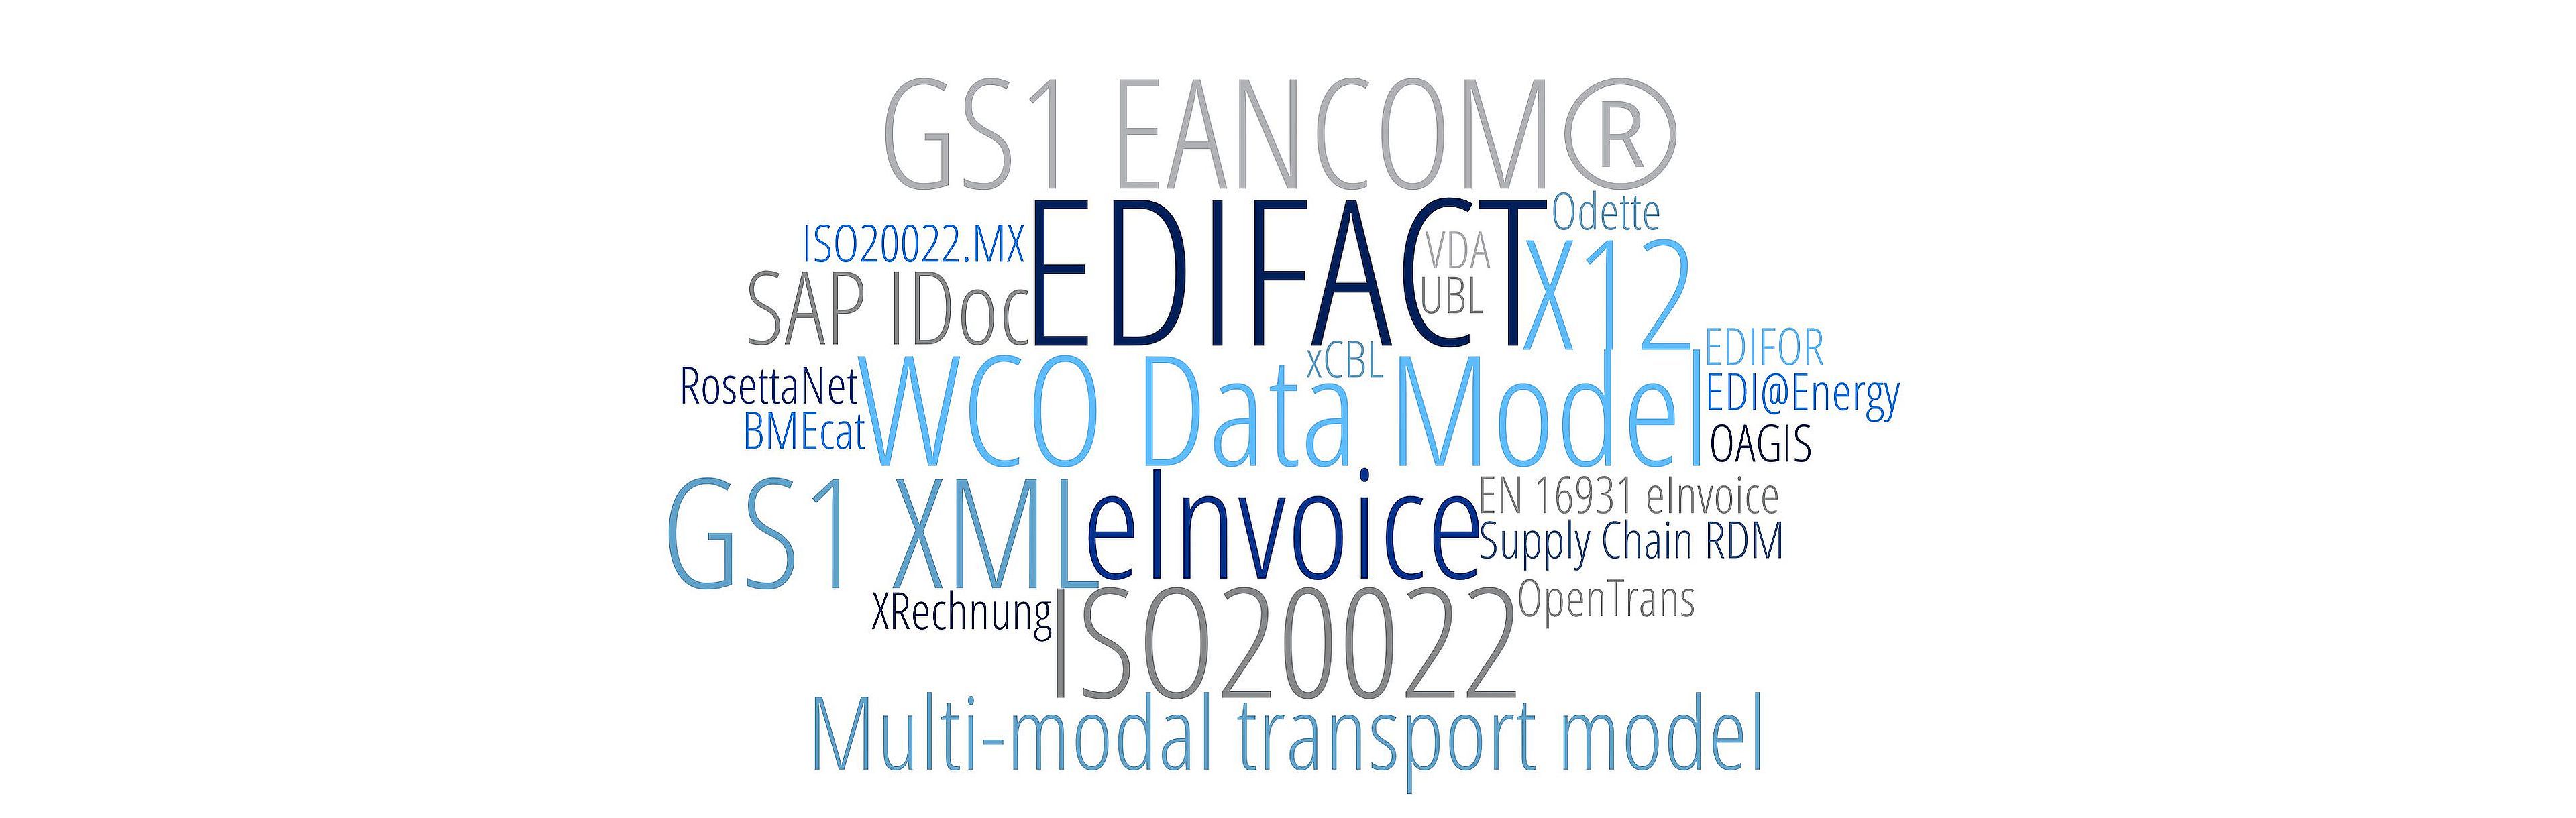 The image shows a word cloud with important eBusiness standards that are important for electronic data exchange.